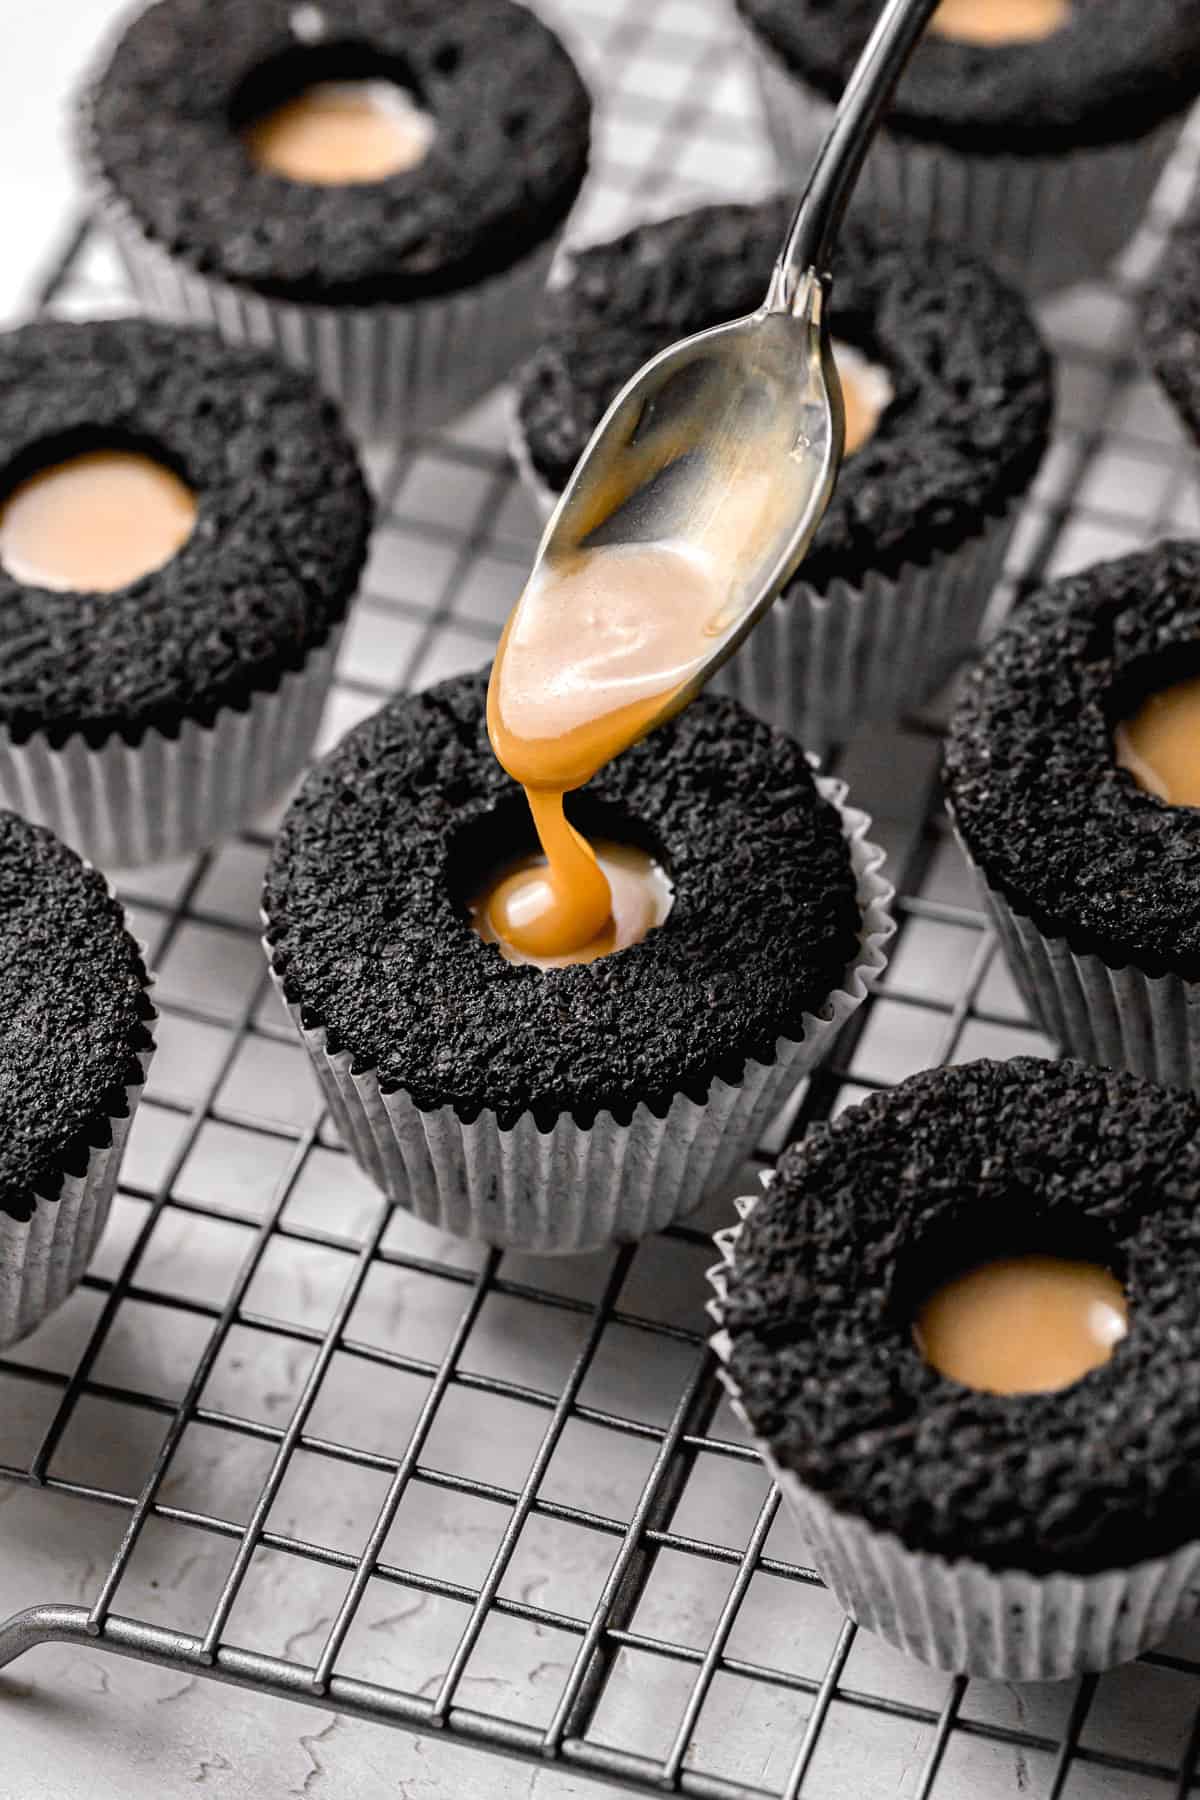 black cocoa cupcakes being filled with caramel sauce.